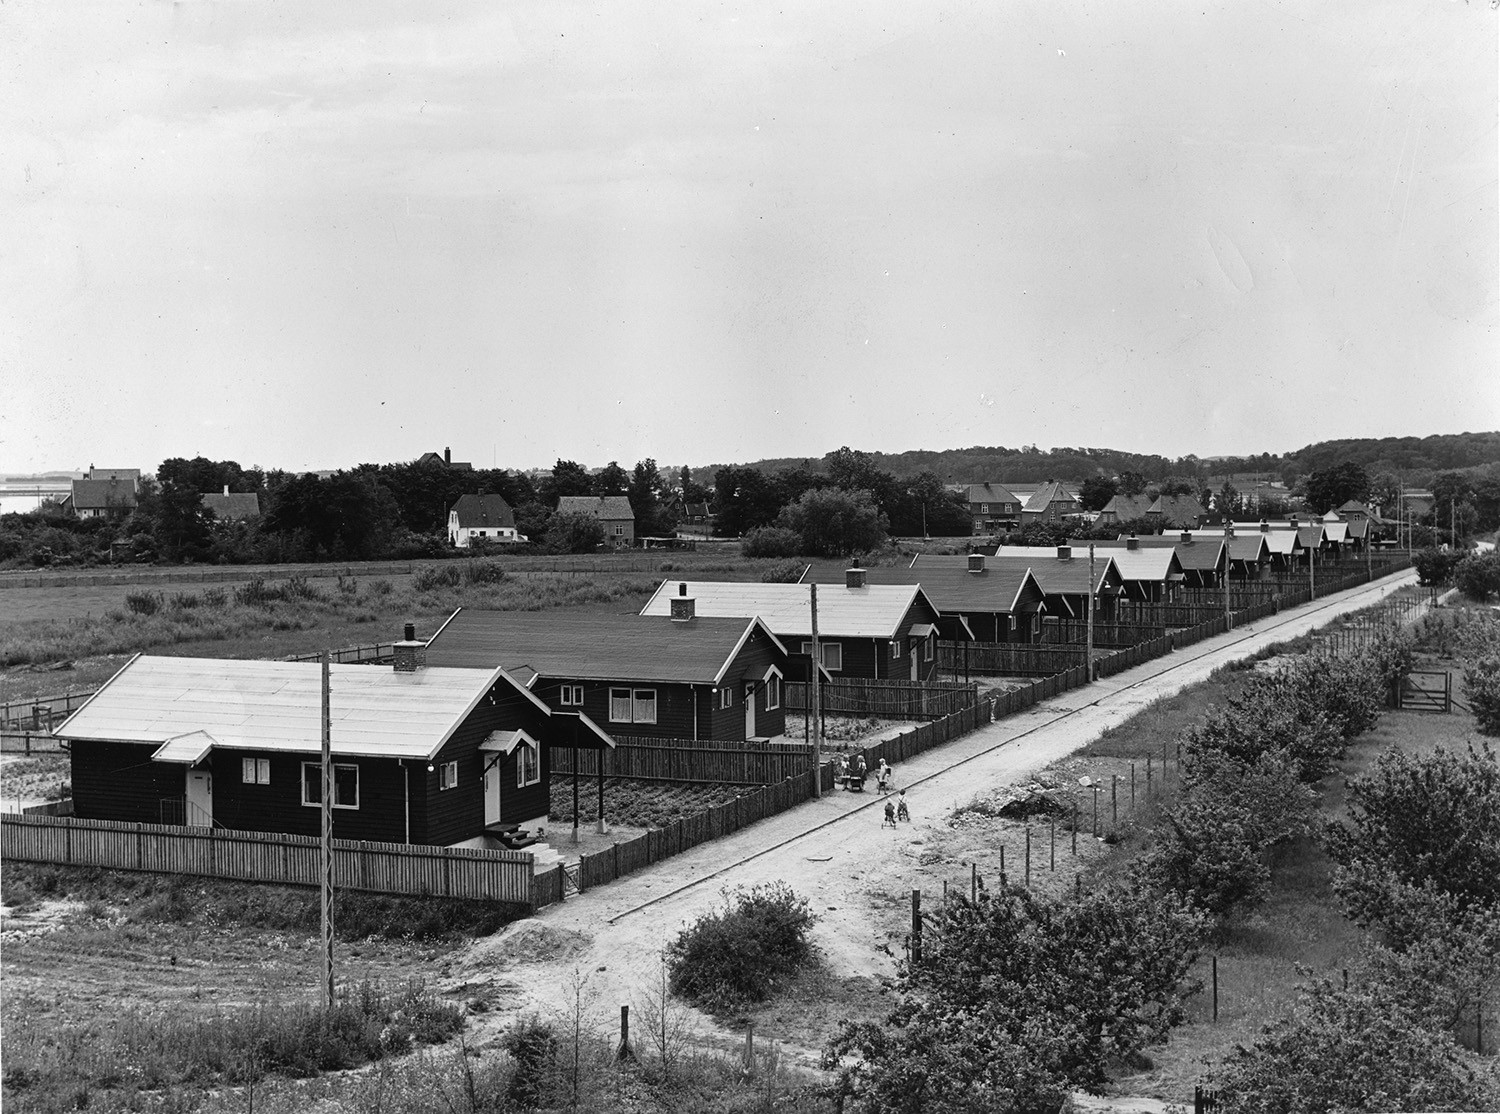 A black and white photo of a street with Puutalo Oy's detached houses on adjacent fenced plots.